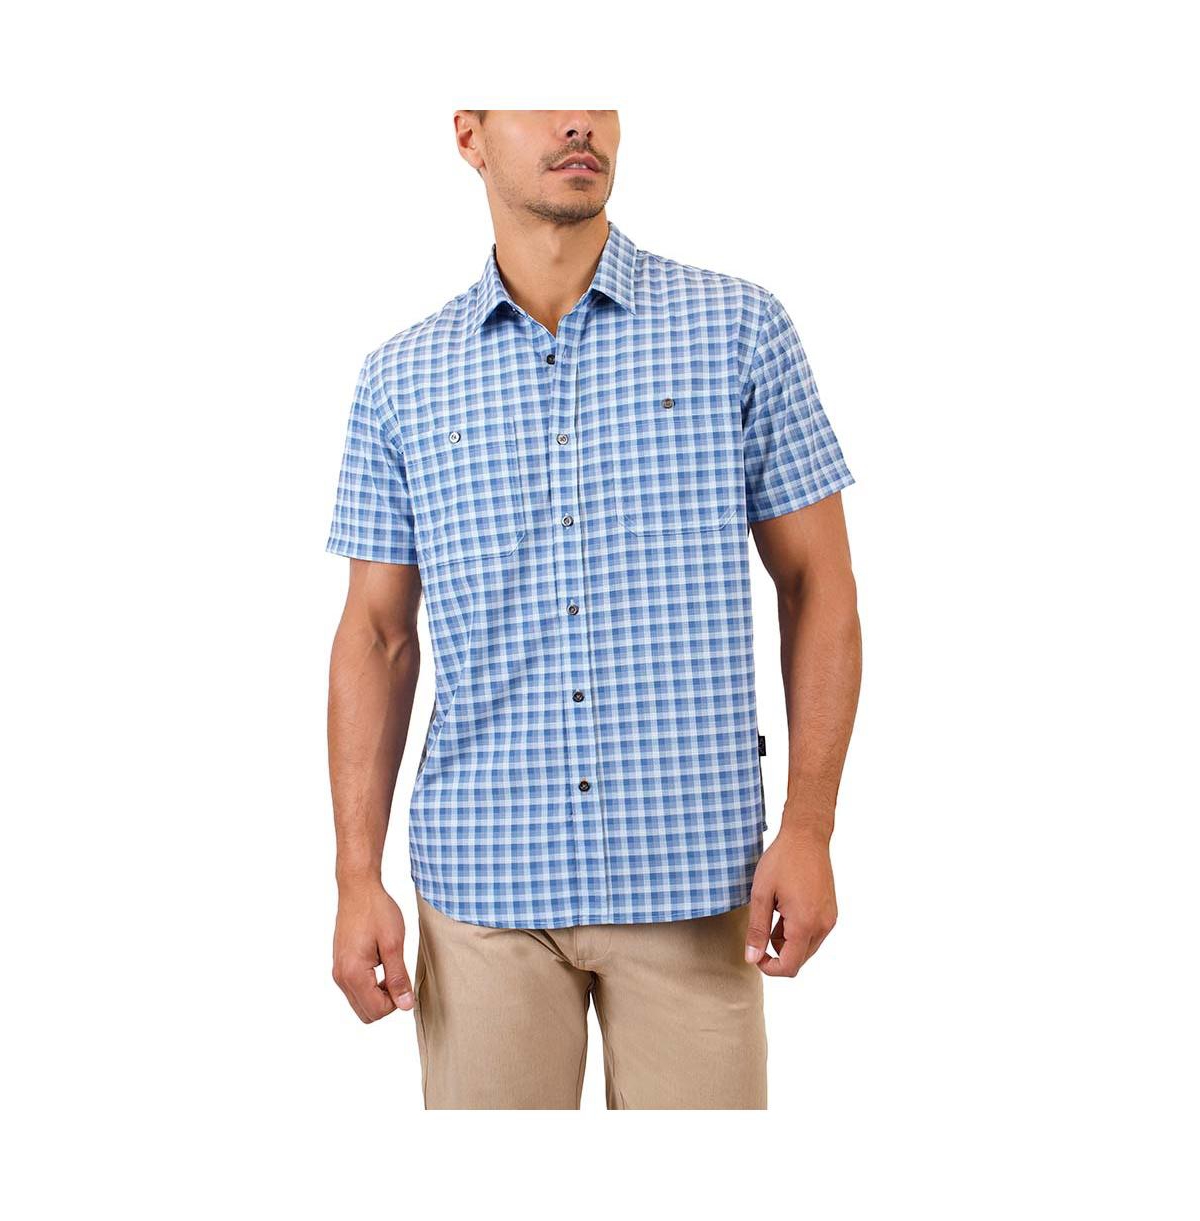 Men's Two-Pocket Breathable Ripstop Sun Protection Button Down Shirt - Creek/steel blue plaid